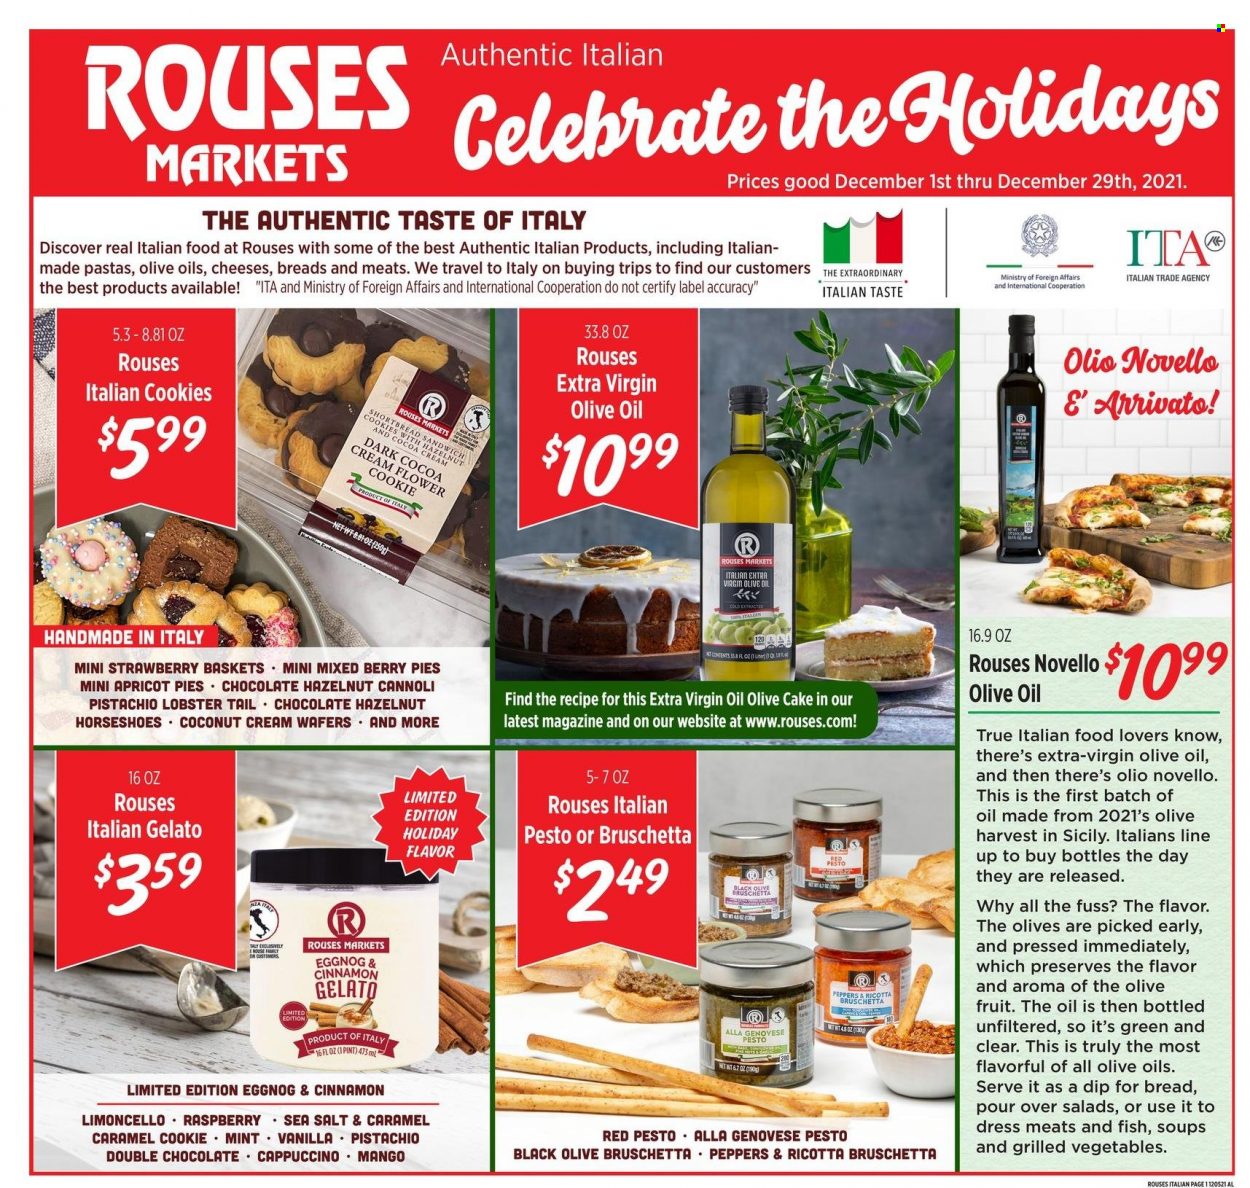 thumbnail - Rouses Markets Flyer - 12/01/2021 - 12/29/2021 - Sales products - cake, mango, coconut, lobster, lobster tail, sandwich, bruschetta, ricotta, cheese, gelato, cookies, sandwich cookies, wafers, chocolate, cocoa, sea salt, olives, cinnamon, caramel, pesto, extra virgin olive oil, olive oil, cappuccino, eggnog, Limoncello. Page 1.